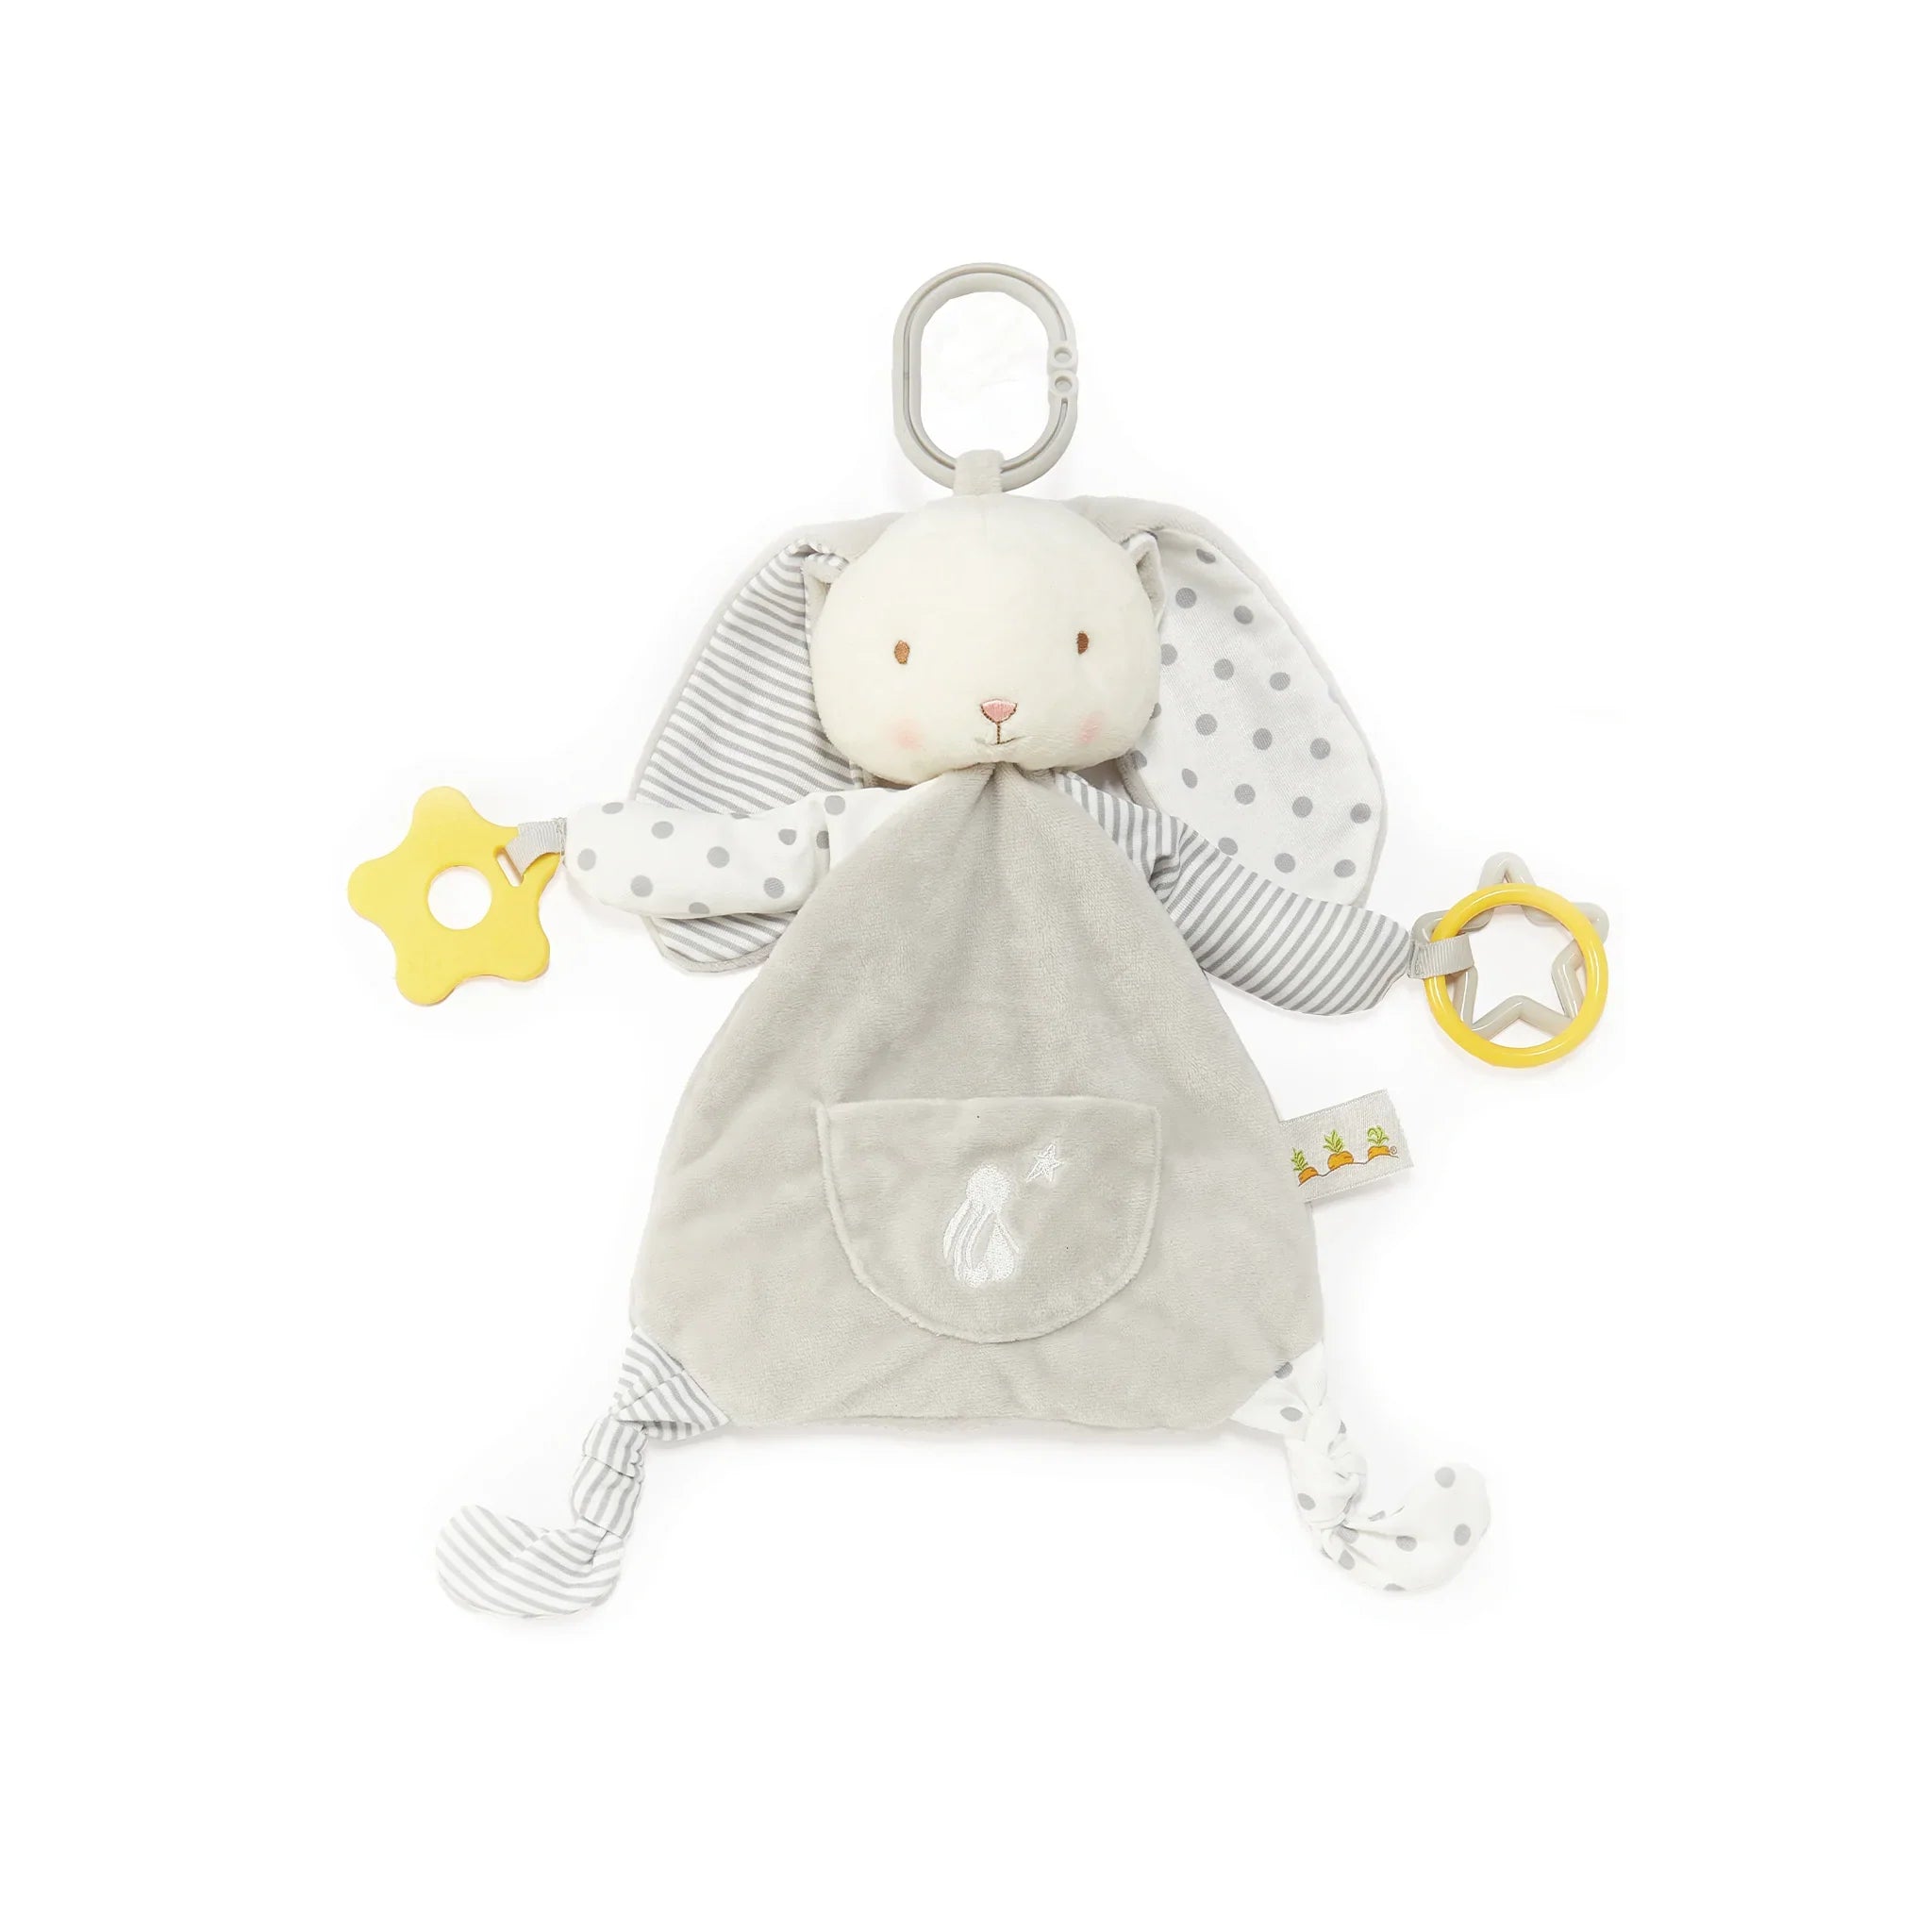 190118: Bloom's Activity Toy-Bloom Bunny-SKU: 190118 - Bunnies By The Bay